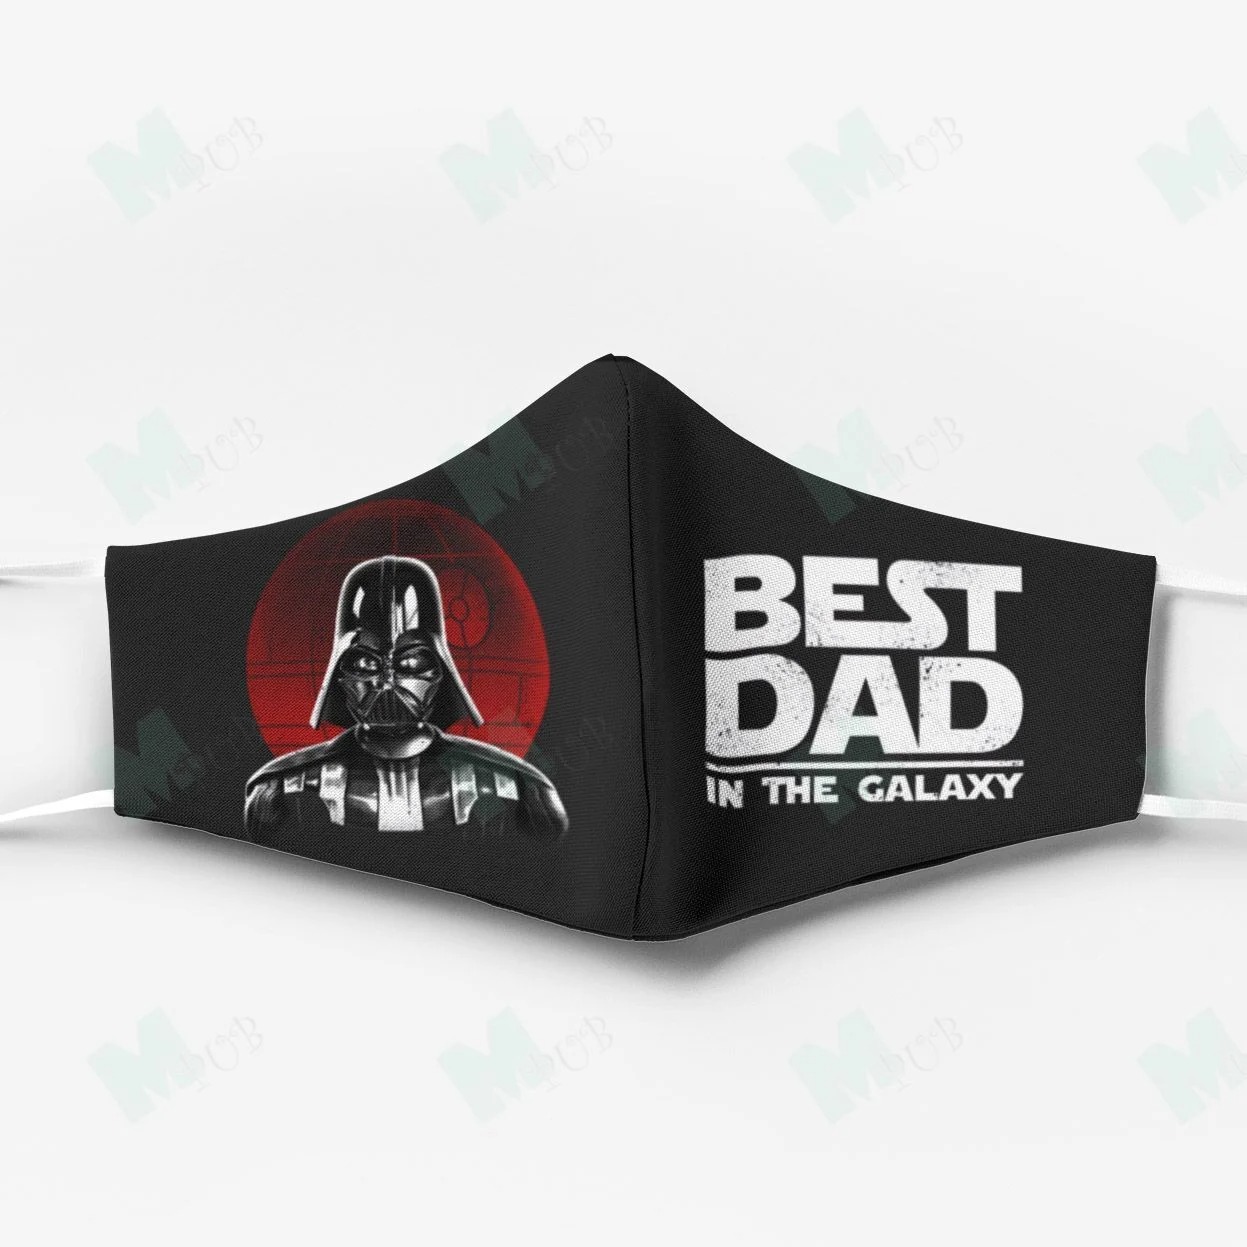 Darth Vader Best Dad in the galaxy face mask